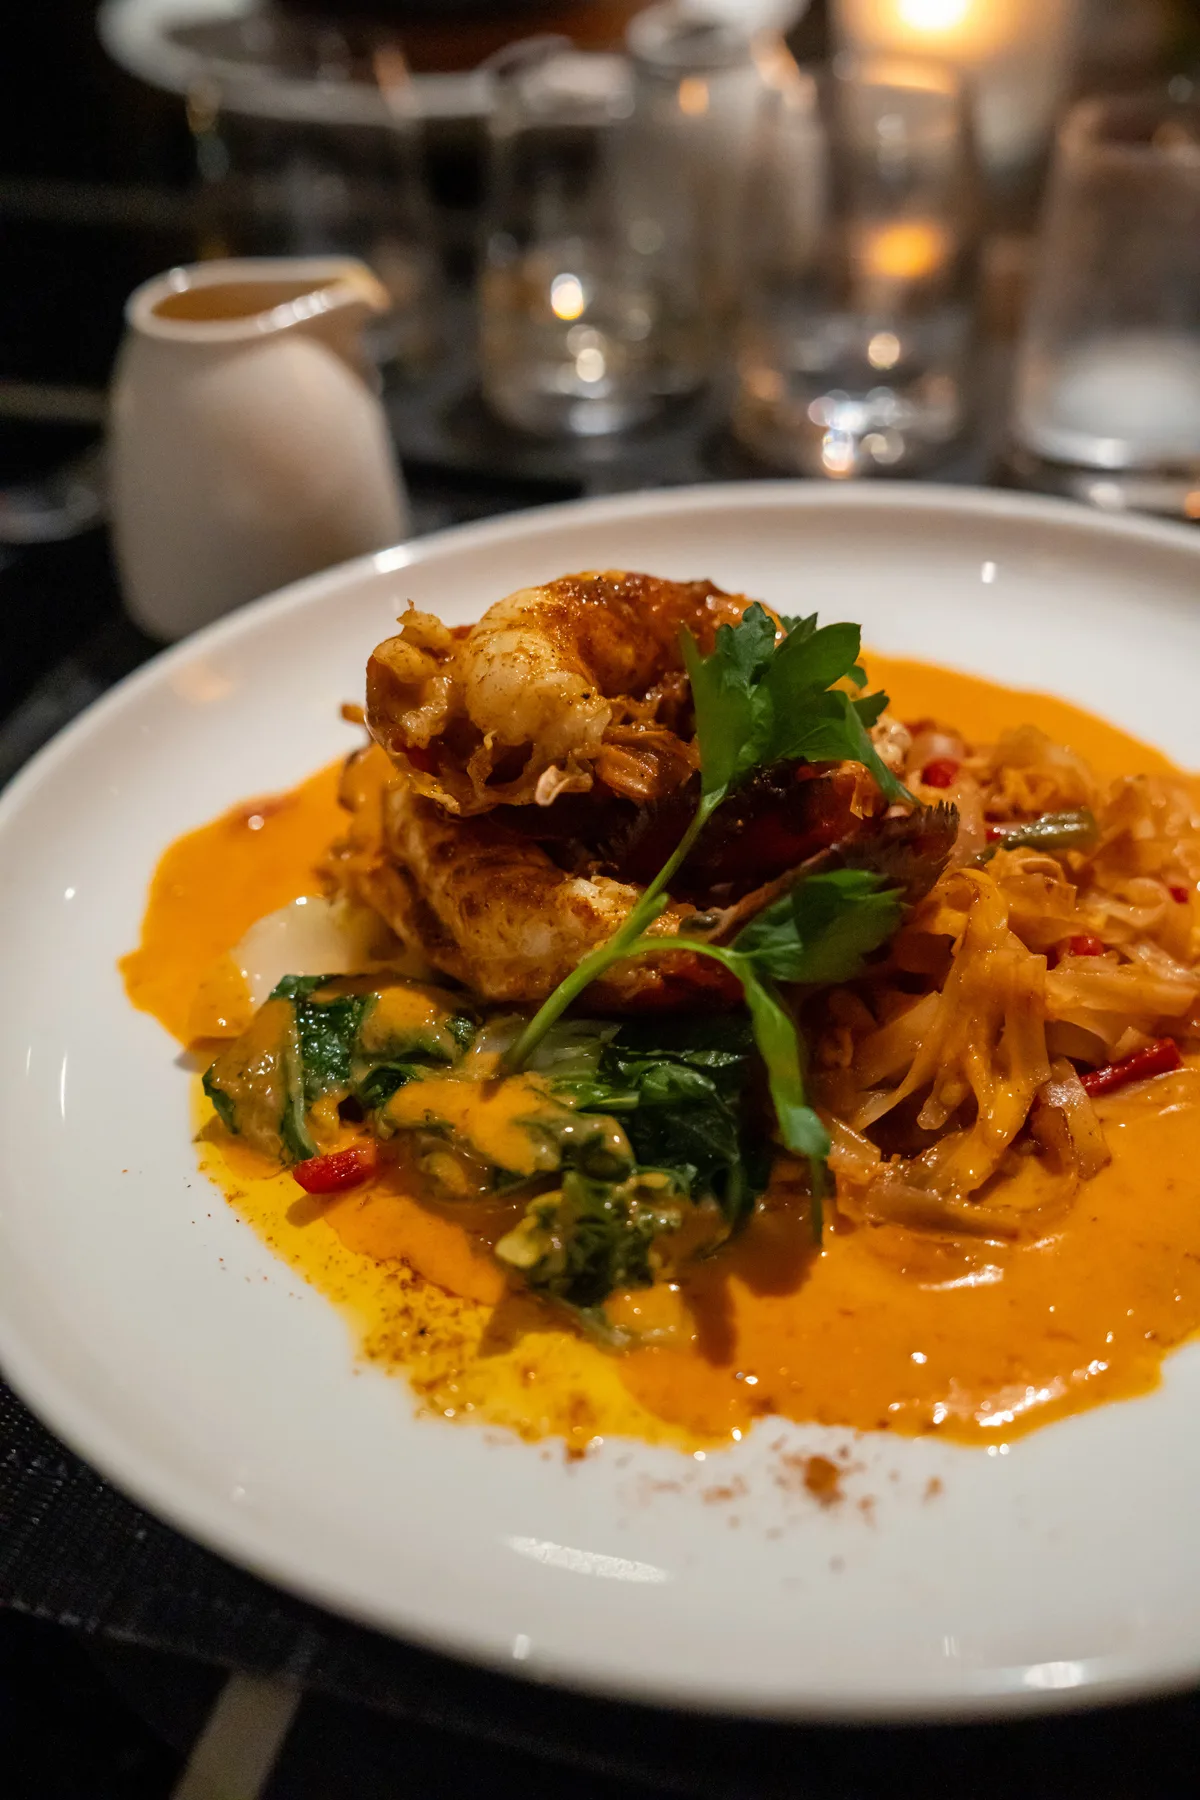 Angry Lobster Pad ThaiMaine lobster, rice noodles, Thai red curry sauce